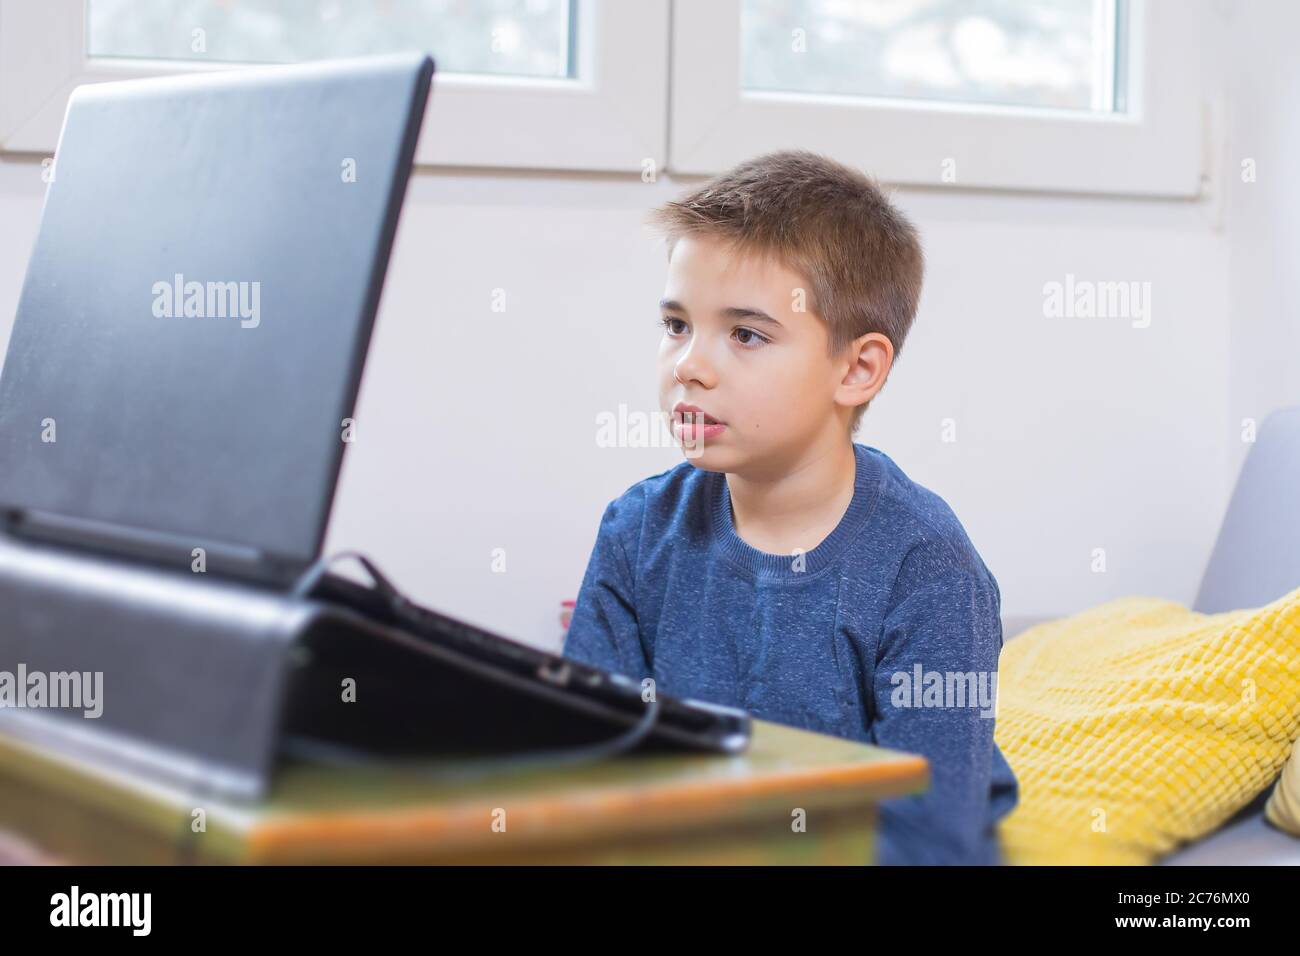 young boy using computer at home Stock Photo